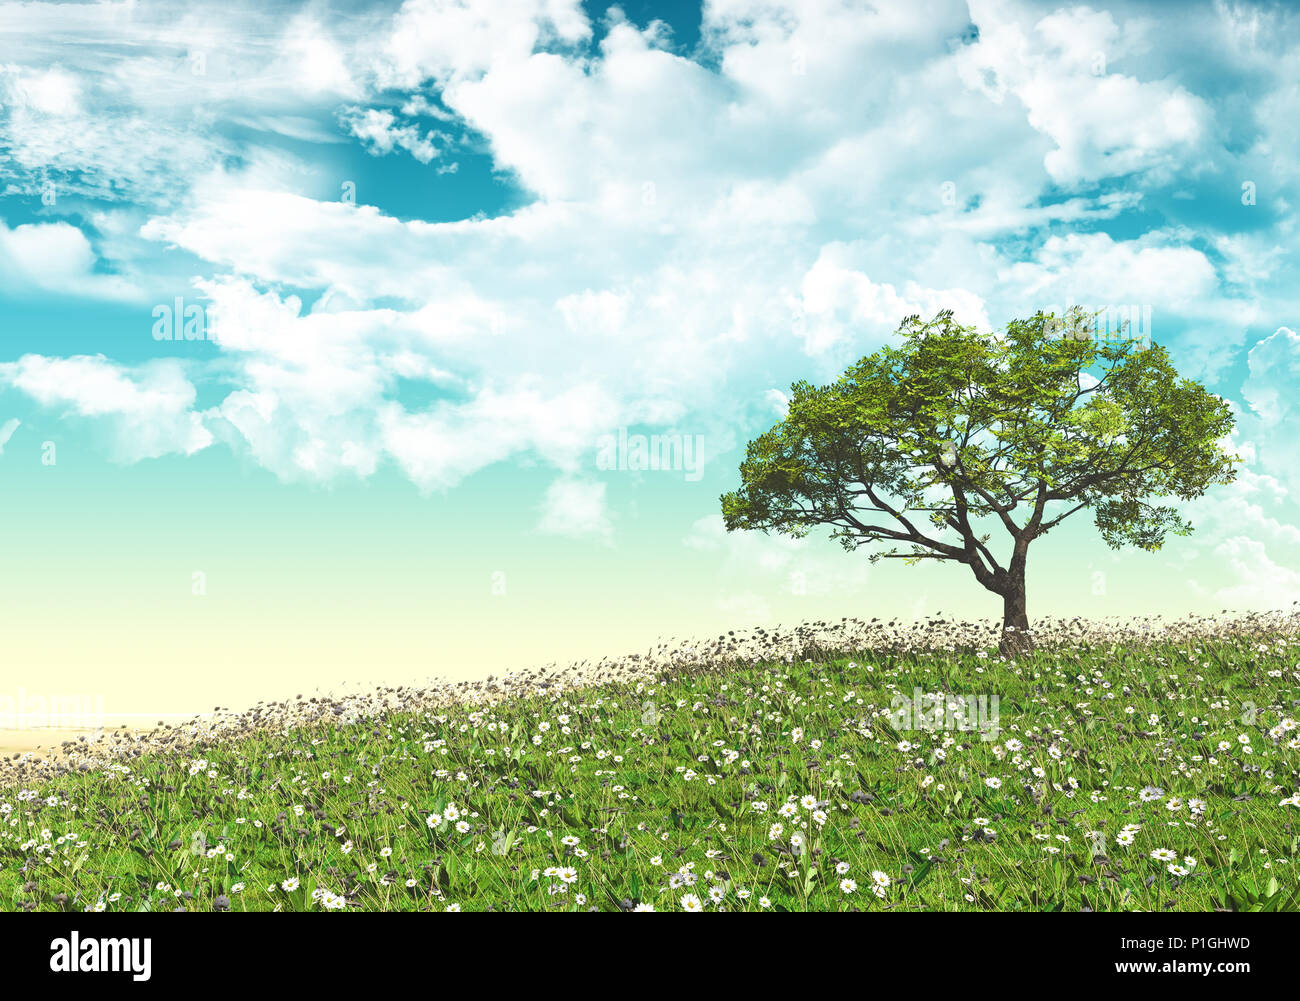 3D landscape with tree in daisy and grass field Stock Photo